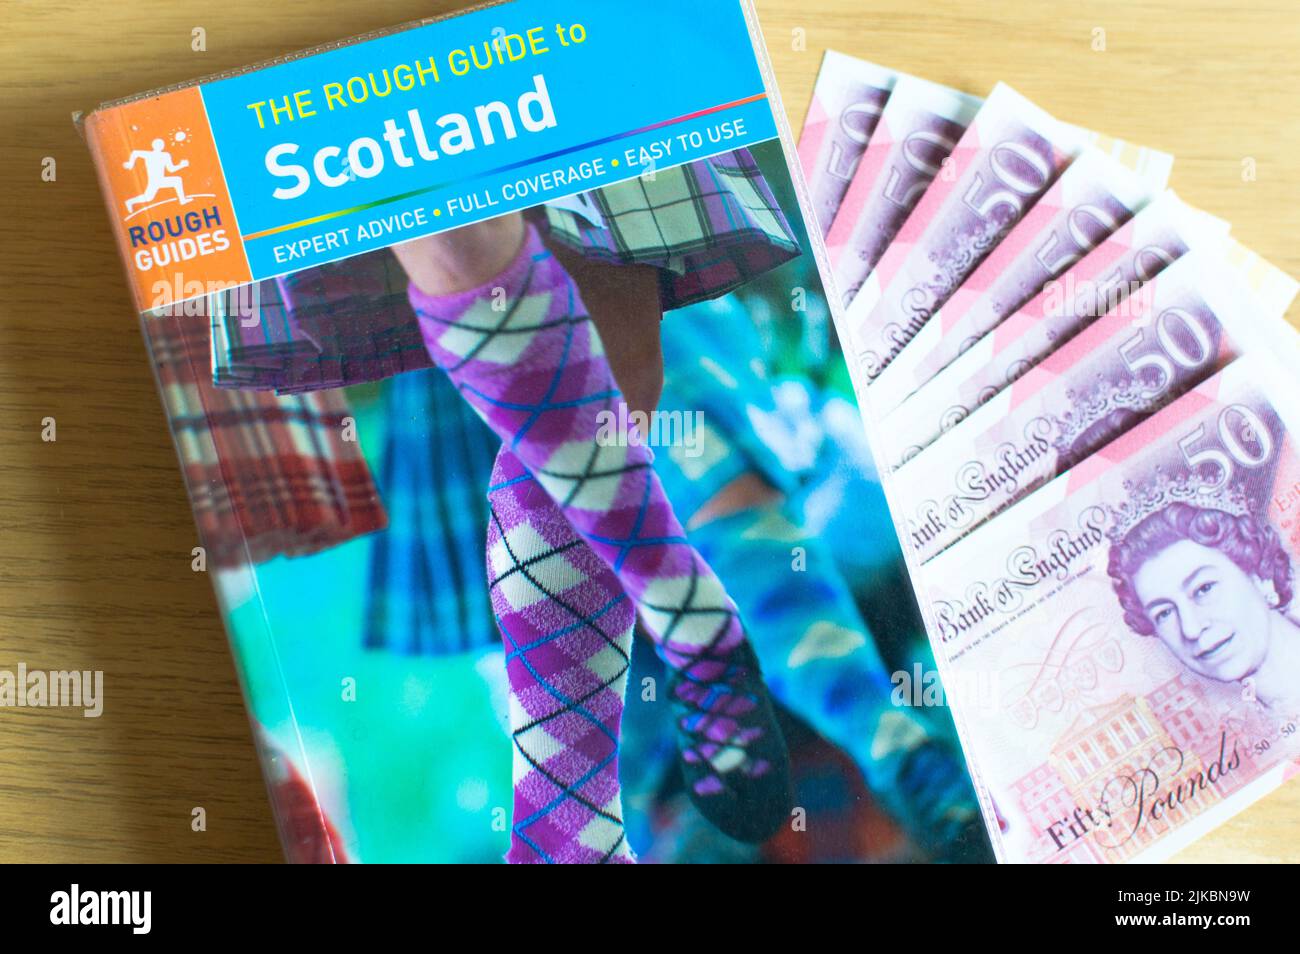 Rough guide to Scotland travel book and currency on a table Stock Photo